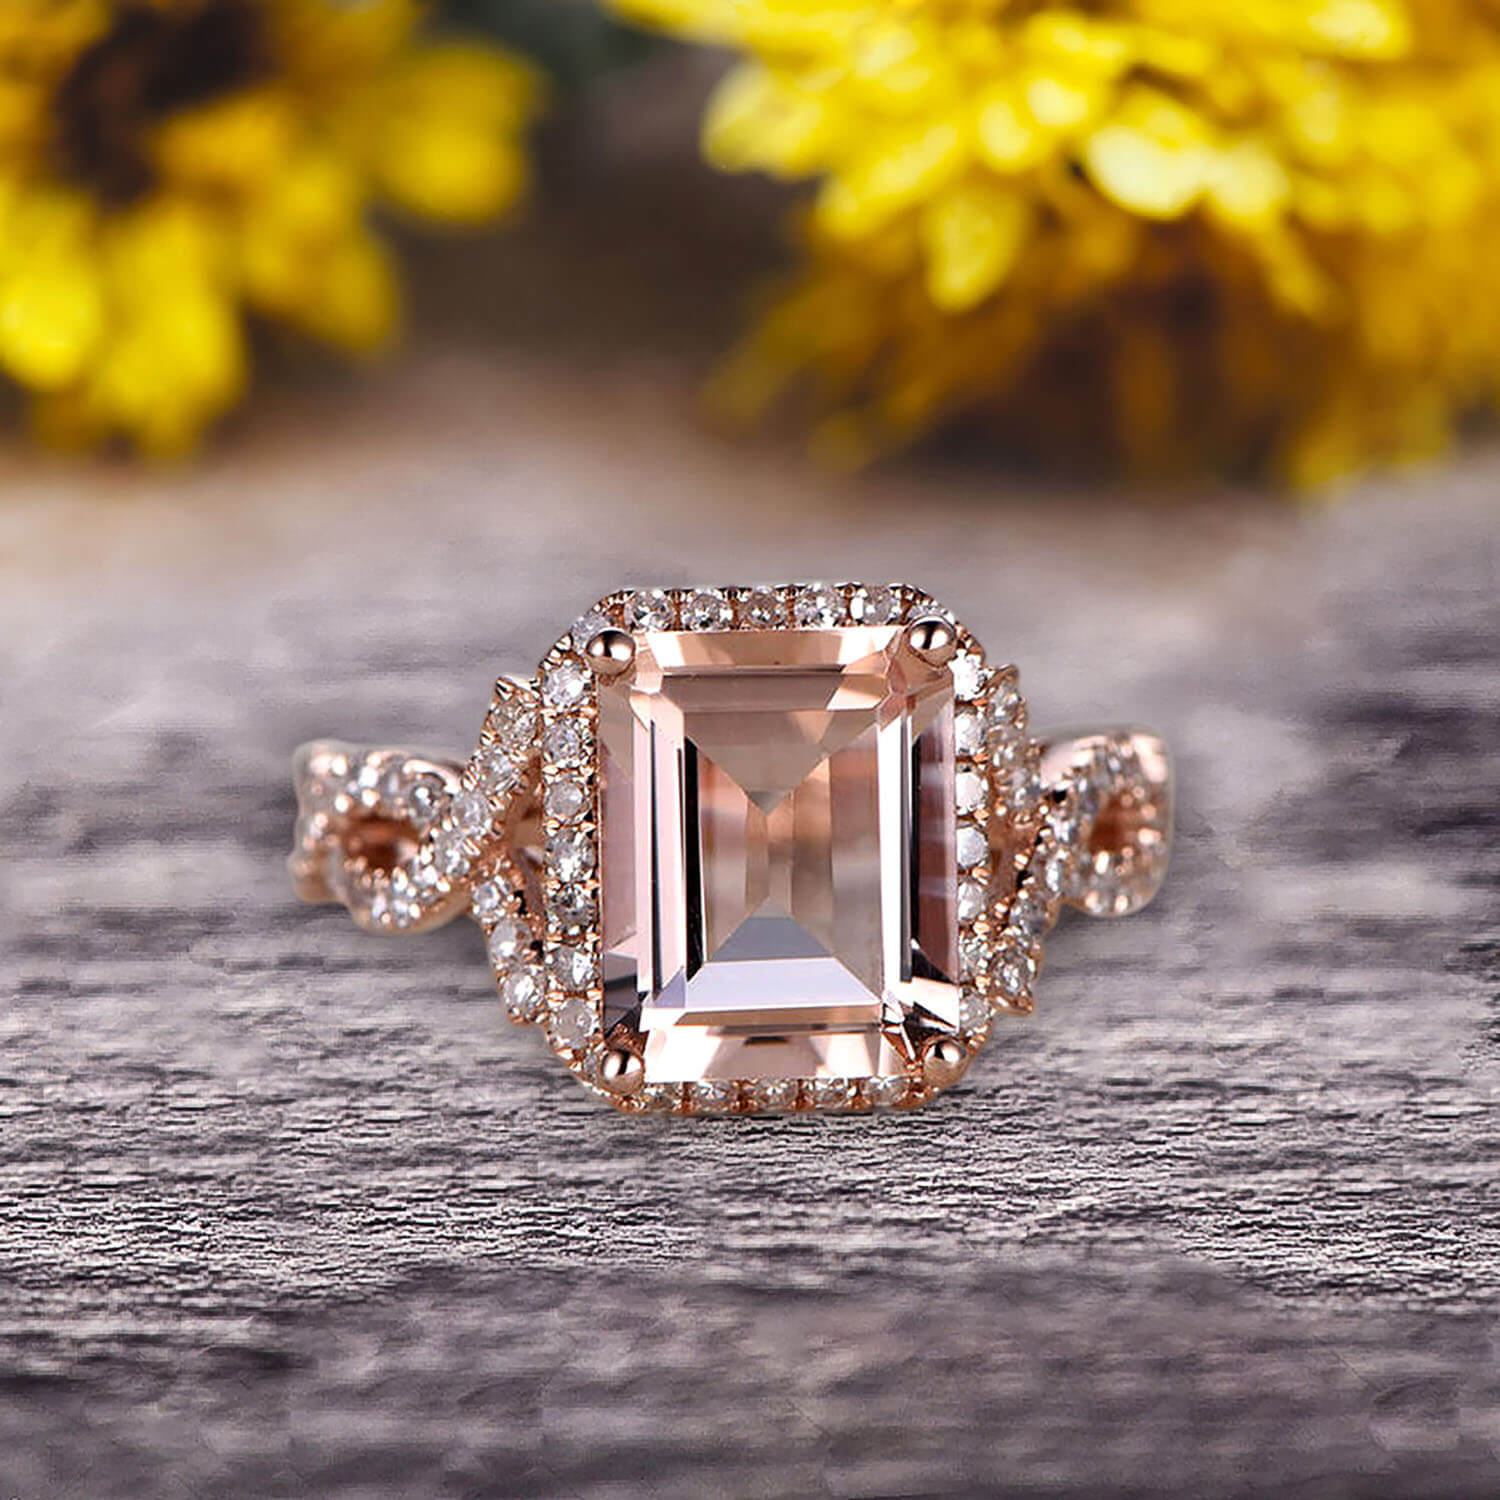 Emerald cut diamond engagement ring in rose gold